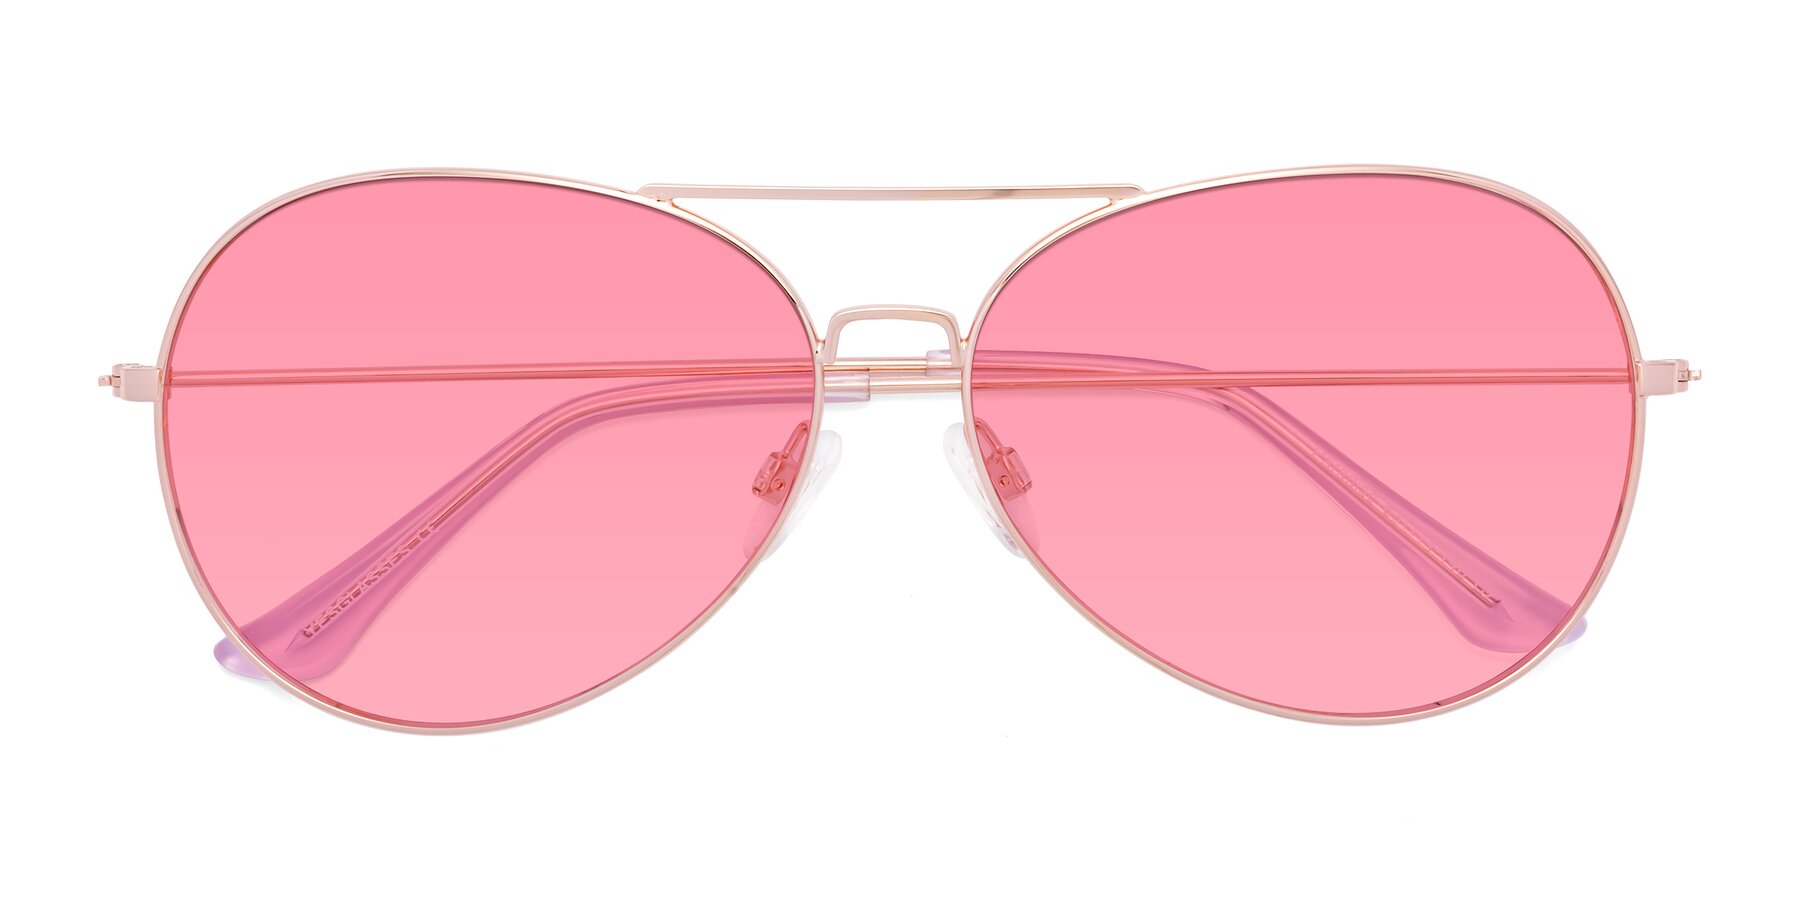 Buy =QUAL Pink Color Sunglasses Aviator Shape Full Rim Gold Frame at  Amazon.in